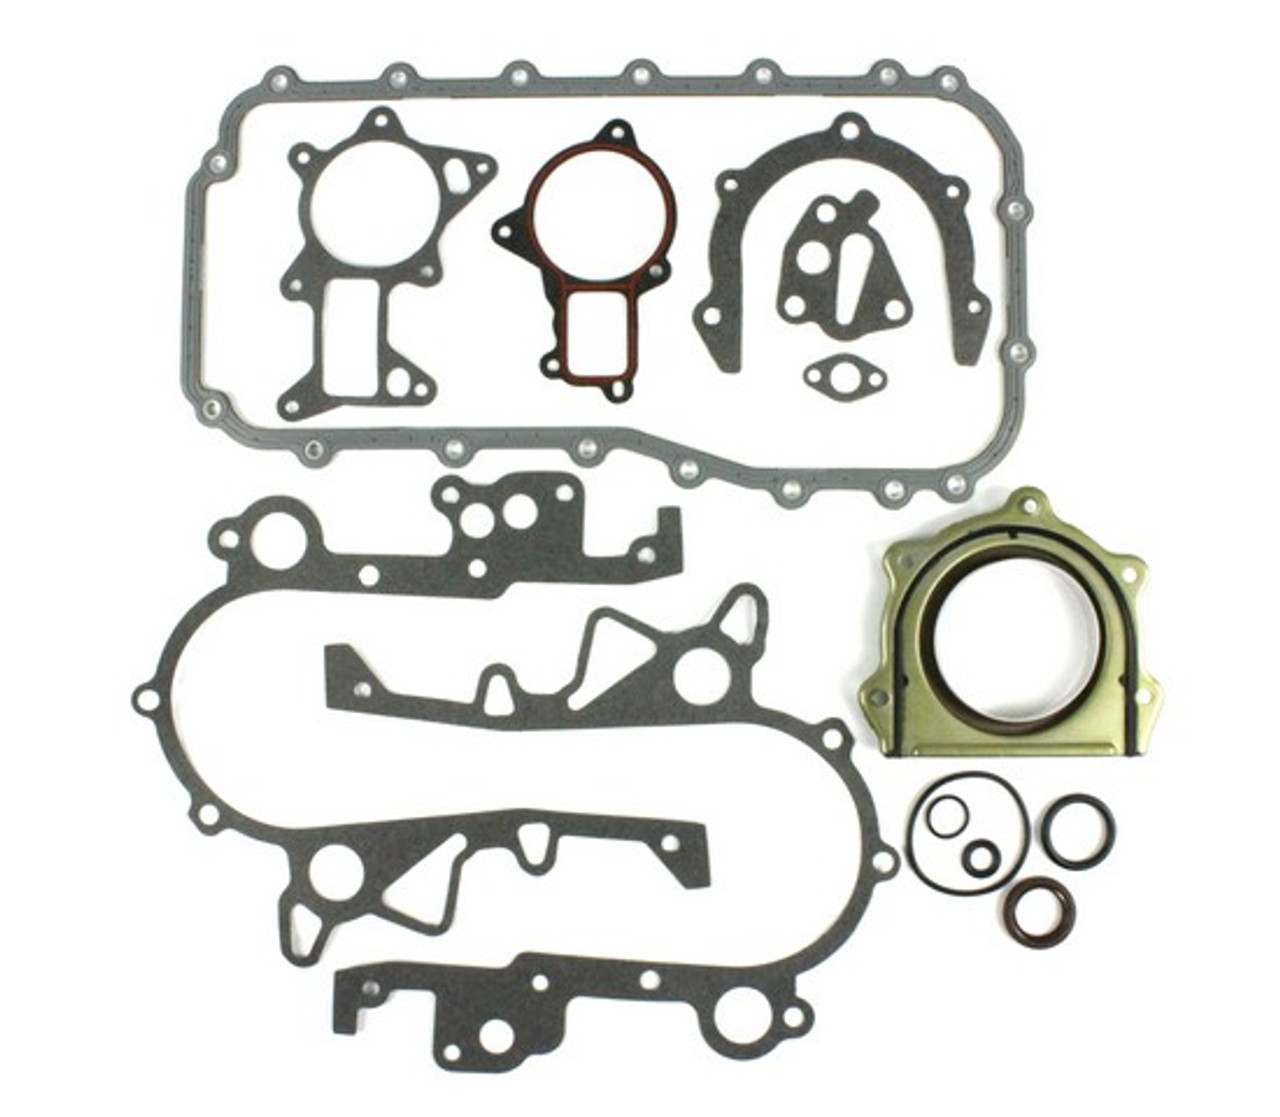 Lower Gasket Set 3.8L 2009 Chrysler Town & Country - LGS1135A.2